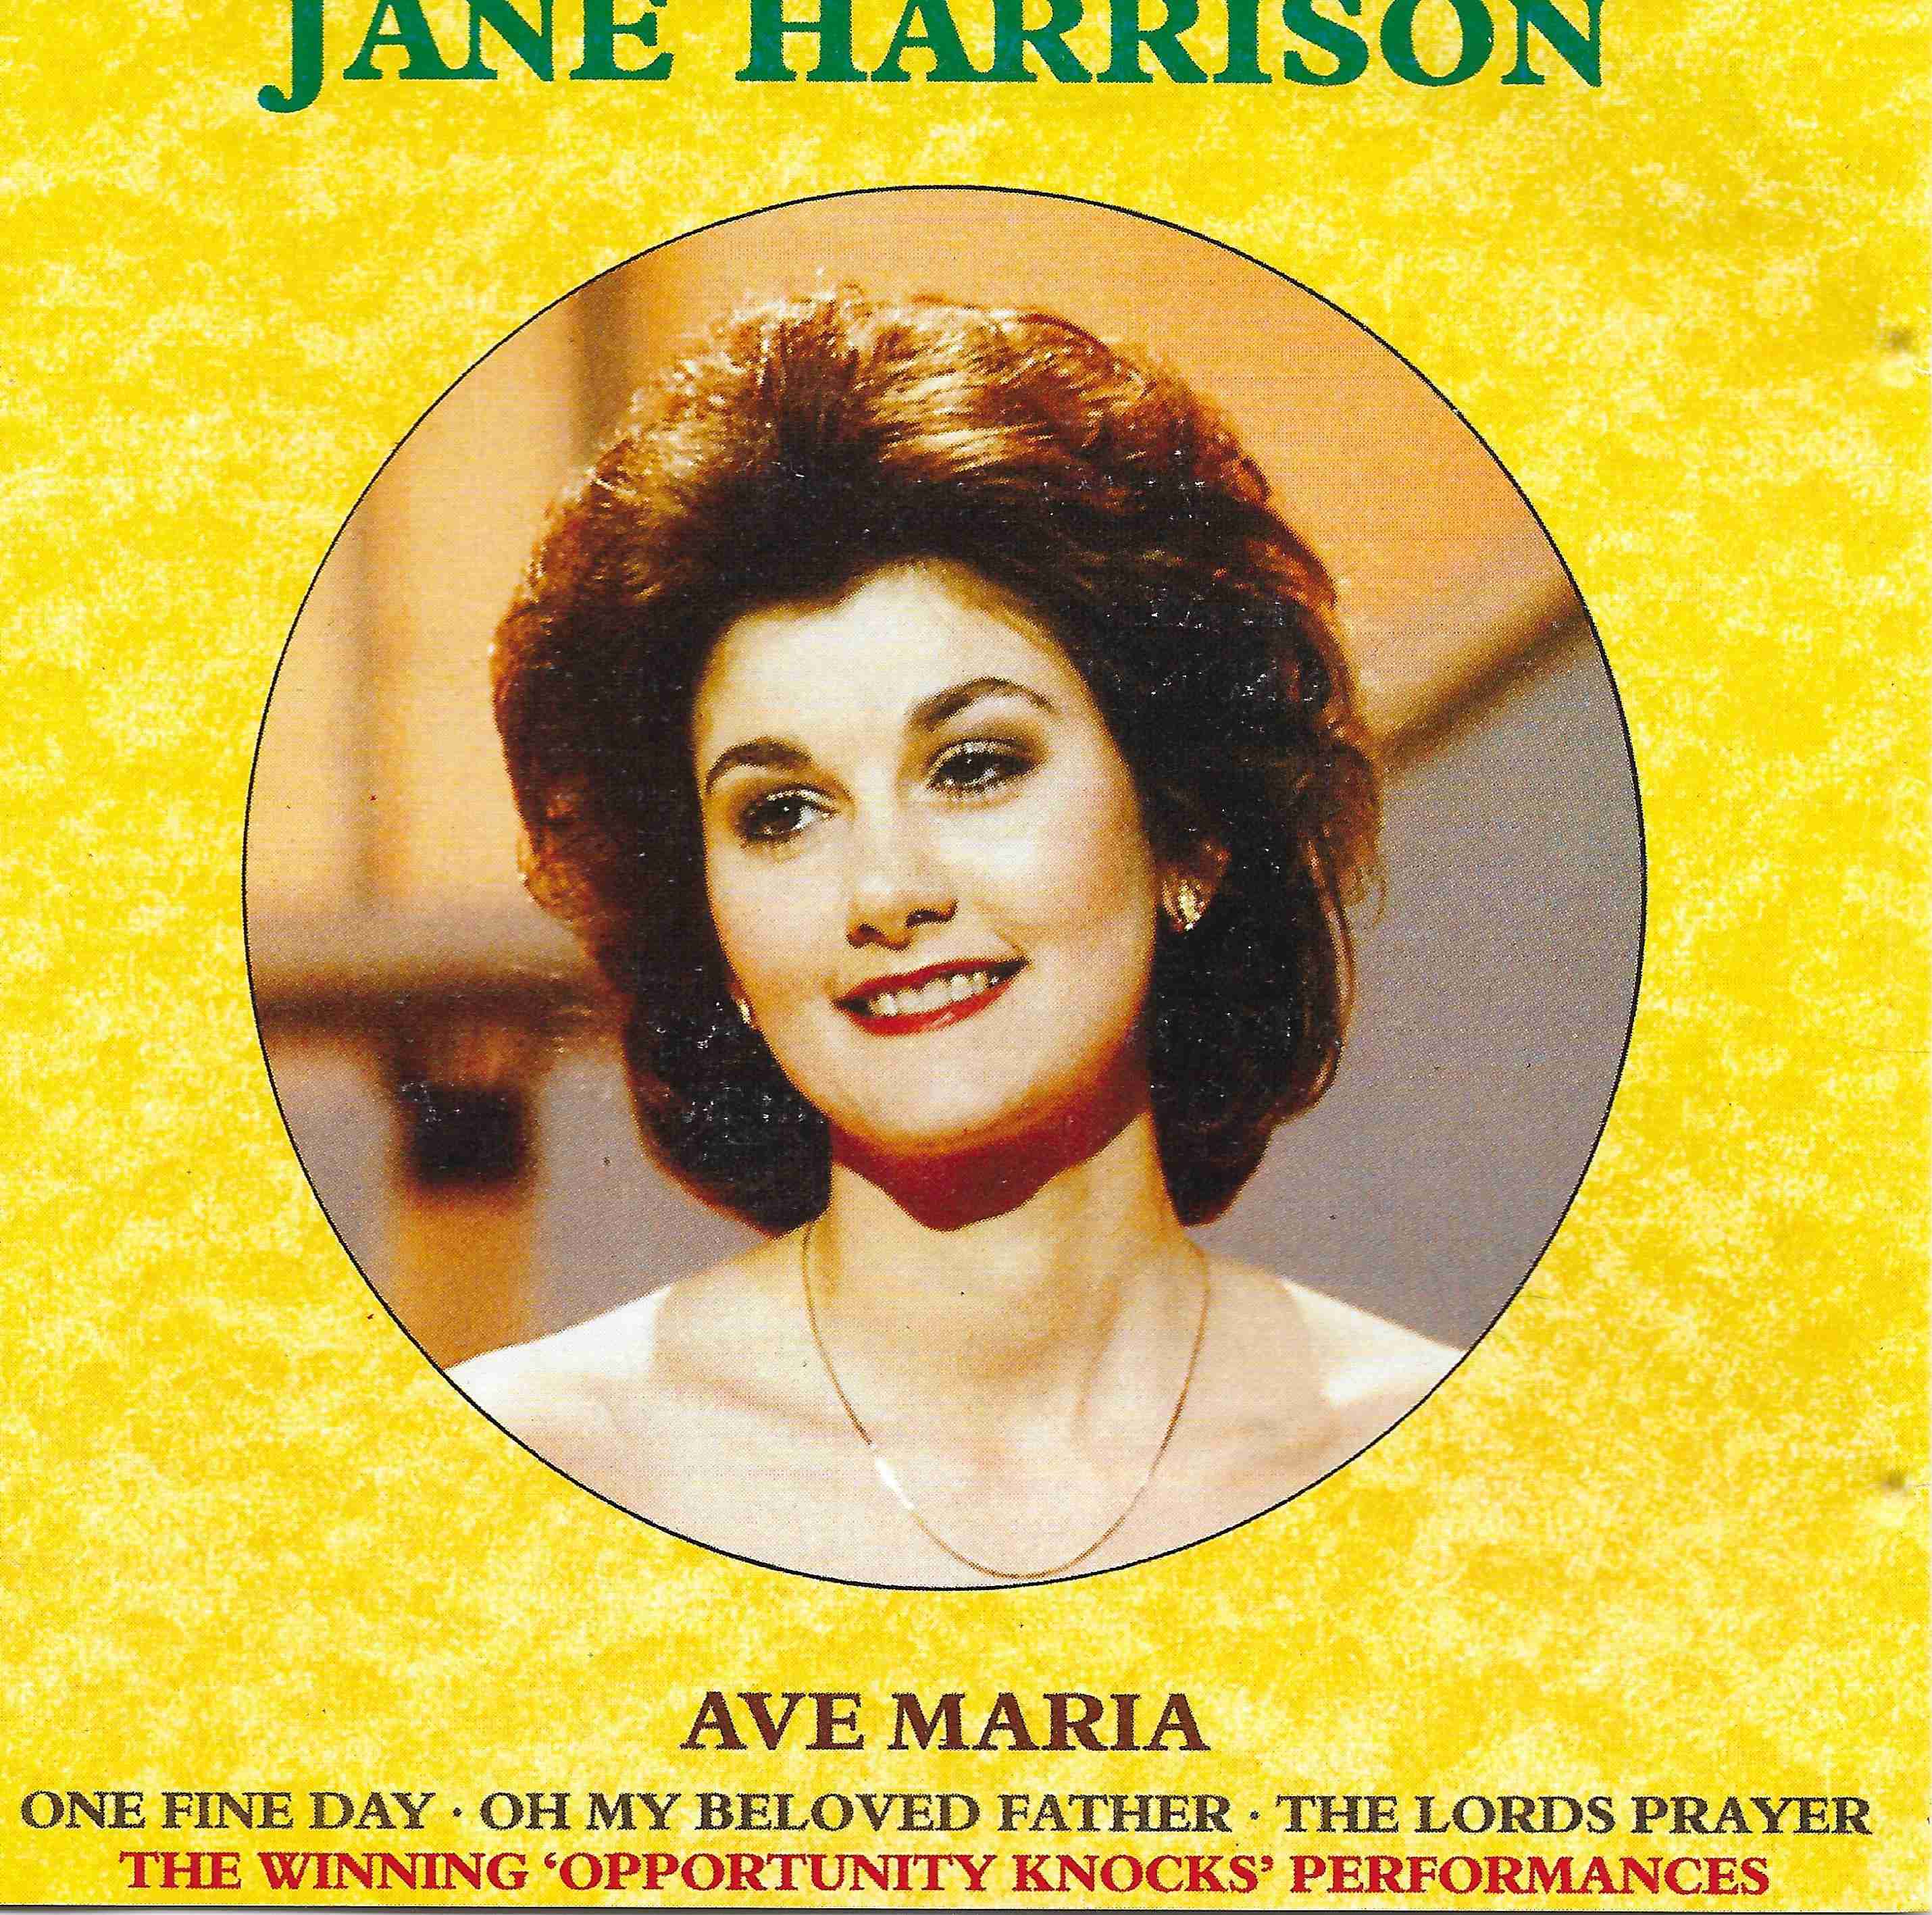 Picture of BBC CDS 227 Ave Maria by artist Bach / Gounod / Puccini / Malotte / Jane Harrison from the BBC records and Tapes library